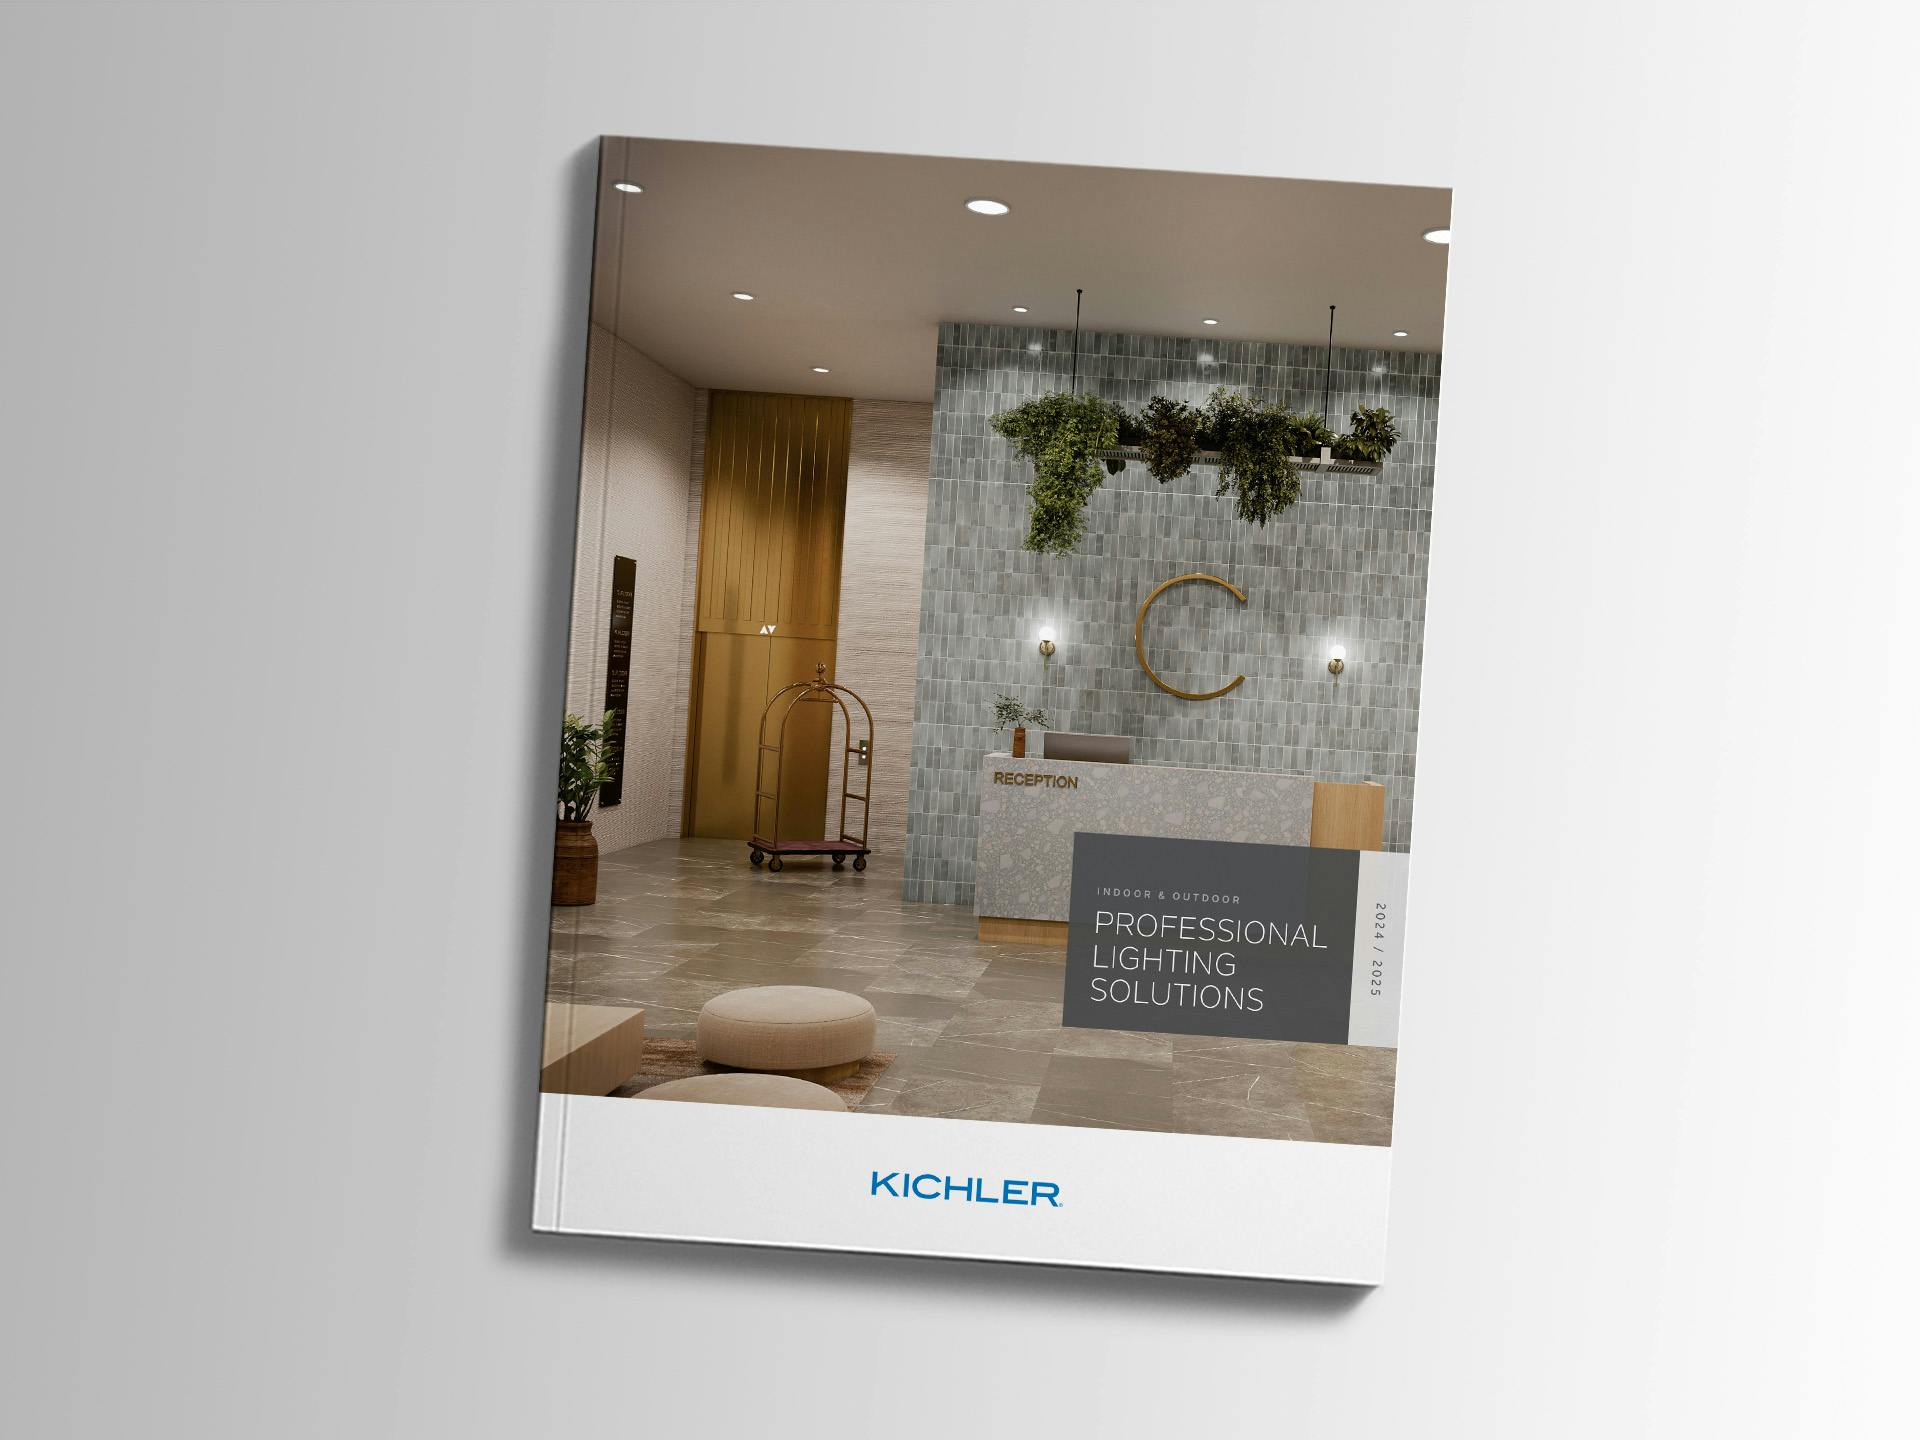 Lighting solutions catalog cover featuring a reception lobby